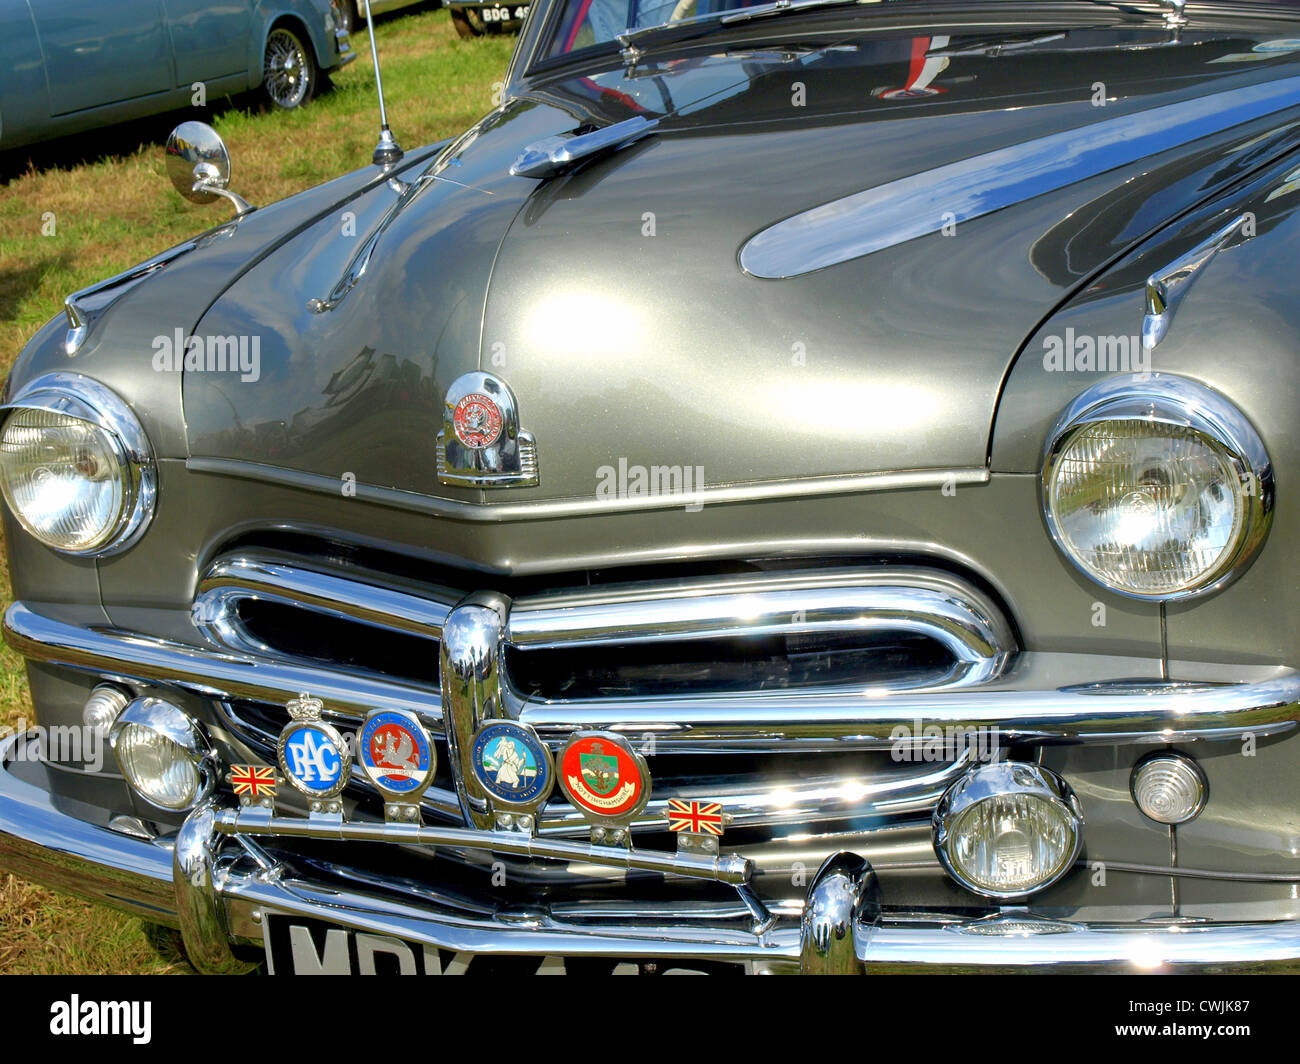 The front and bonnet (hood) of a vintage Vauxhall on display at the Moorgreen country show, Watnall, Nottinghamshire, England. Stock Photo